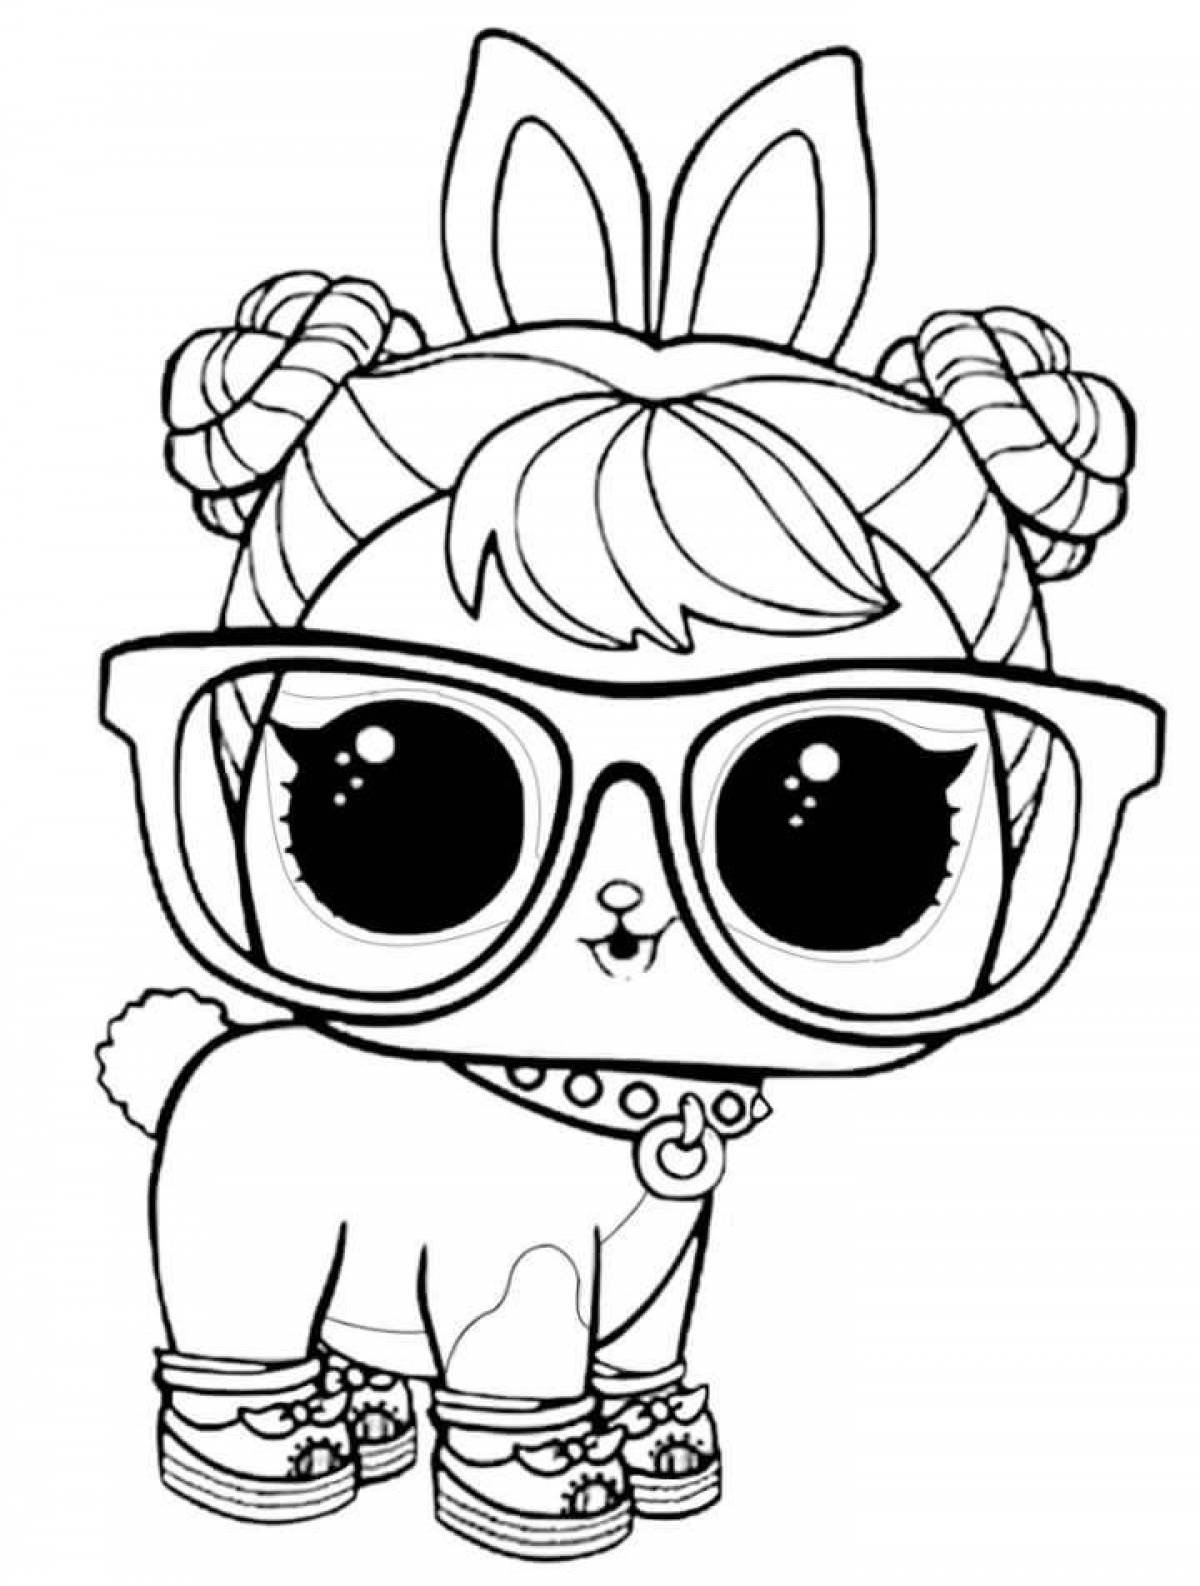 Playful lola coloring page for kids